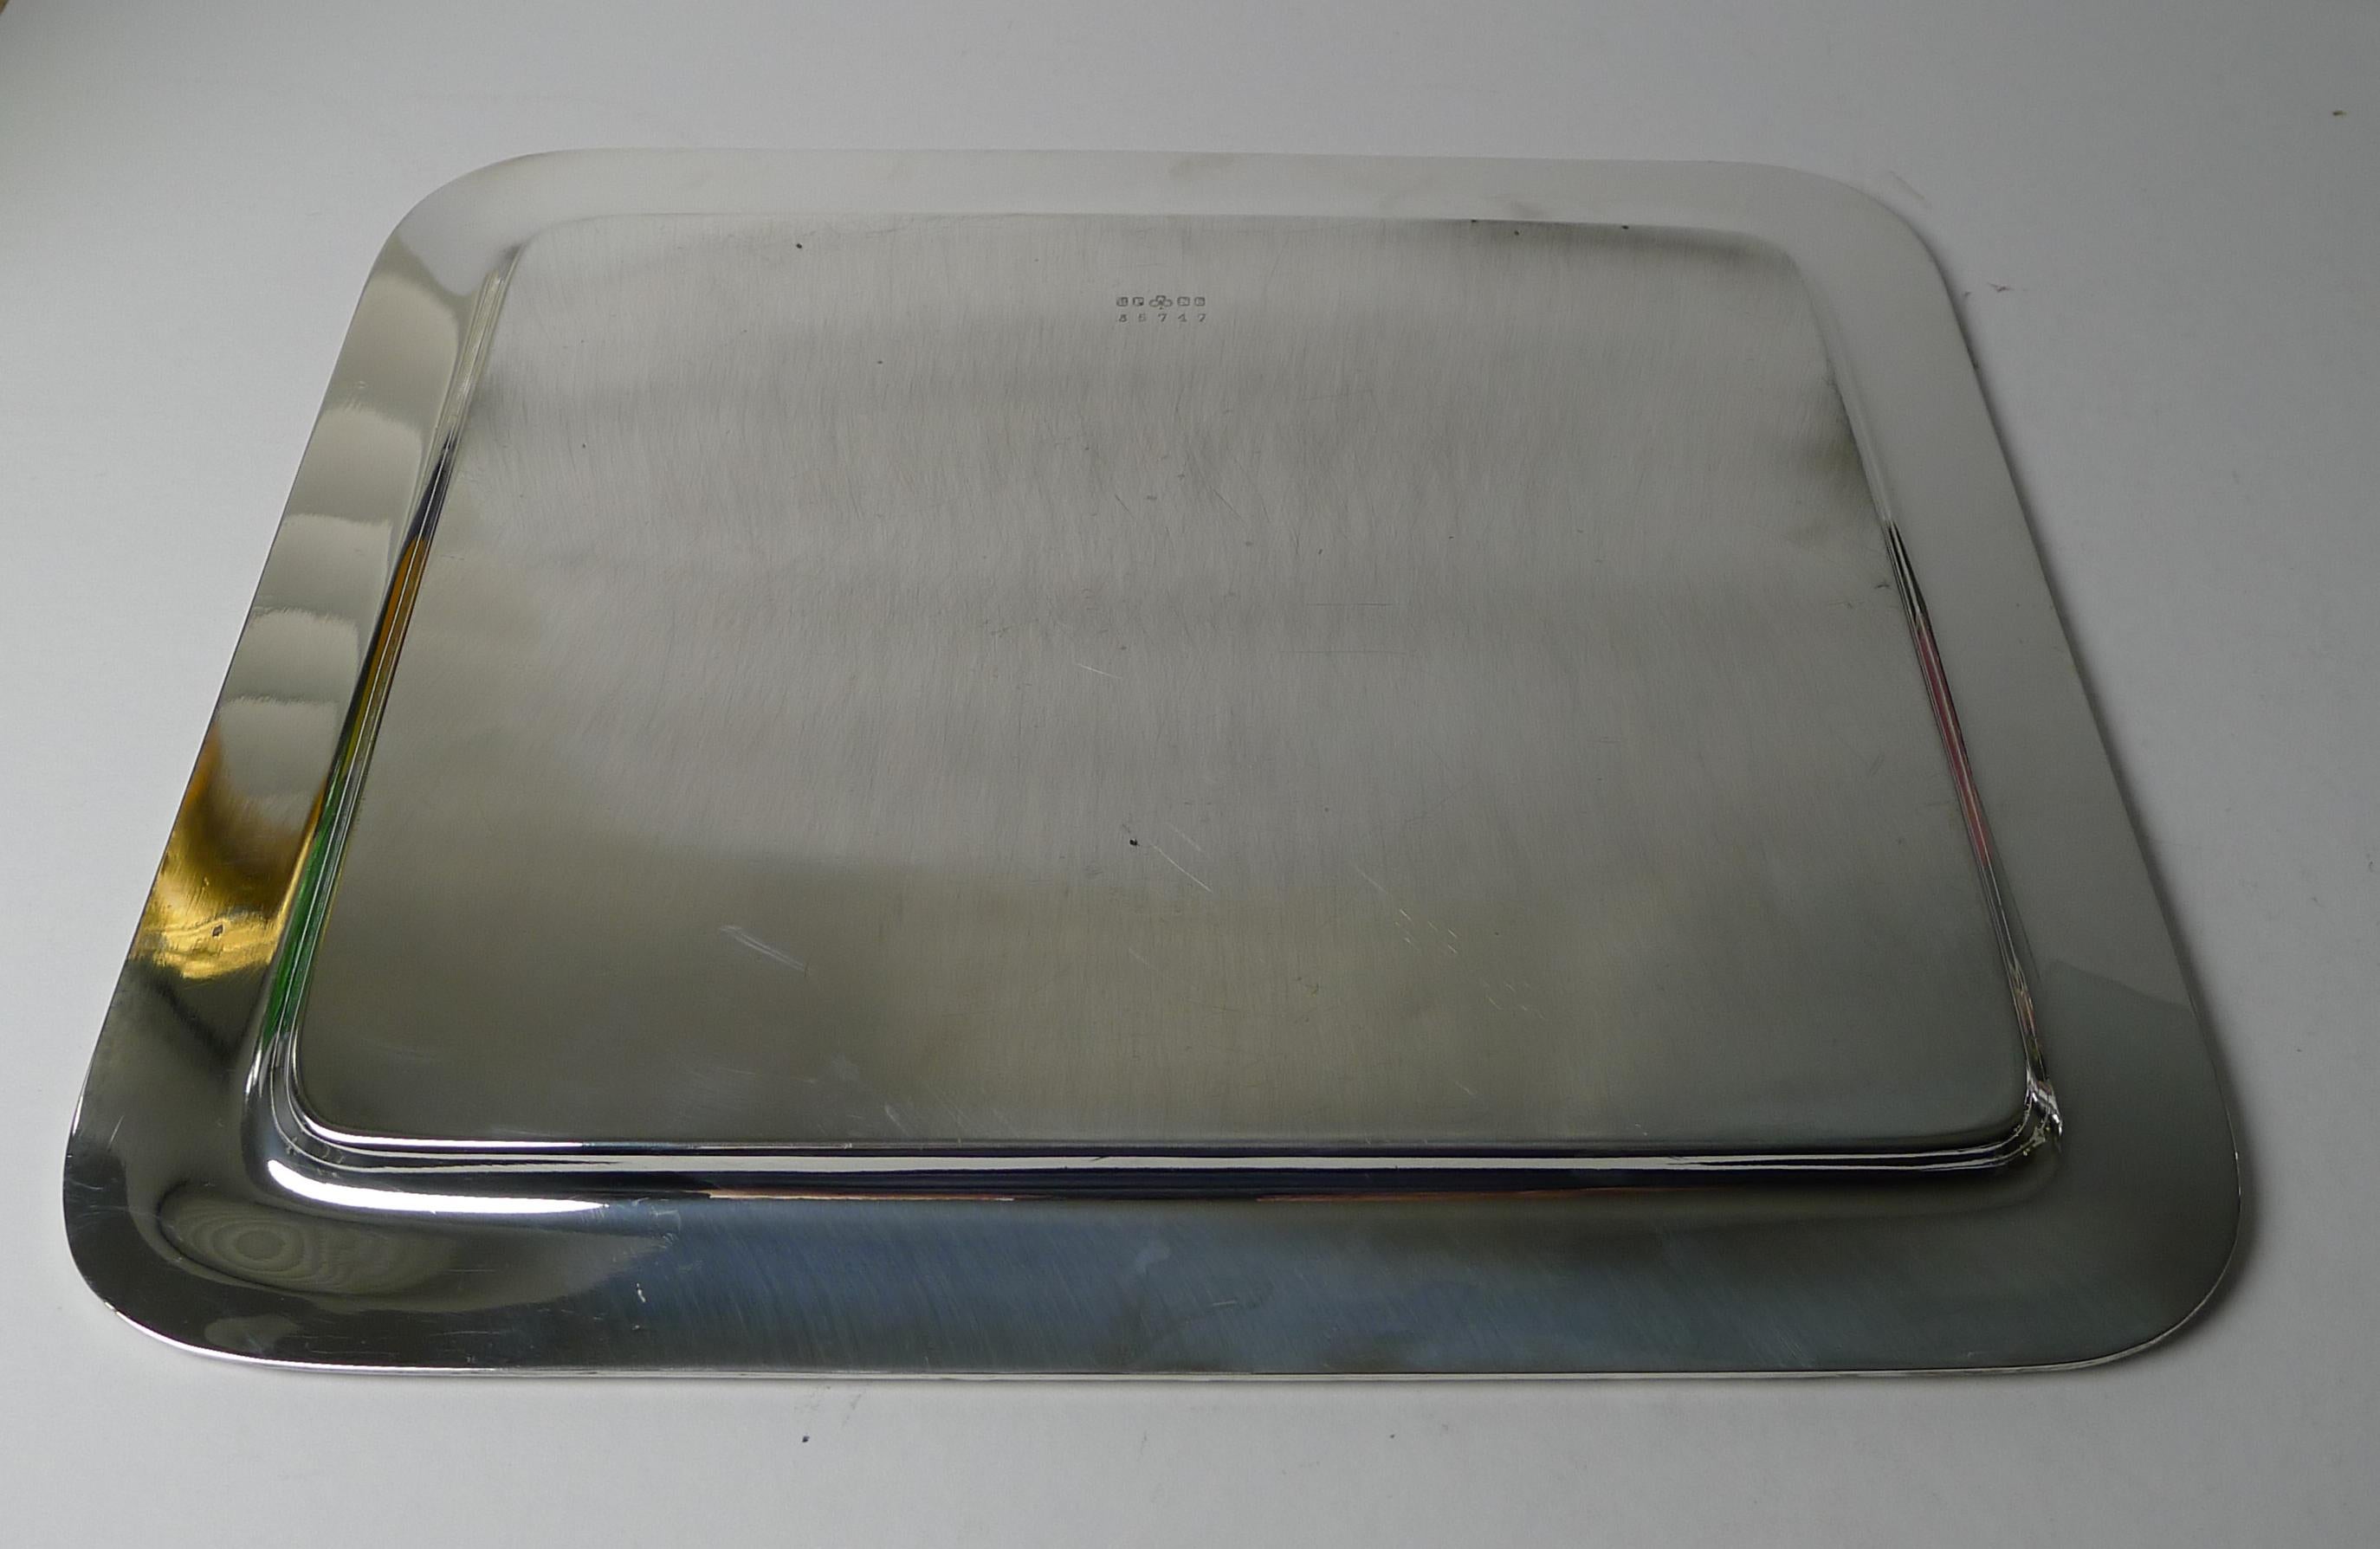 Early 20th Century Elegant English Silver Plated Cocktail Tray by Barker Brothers c.1900